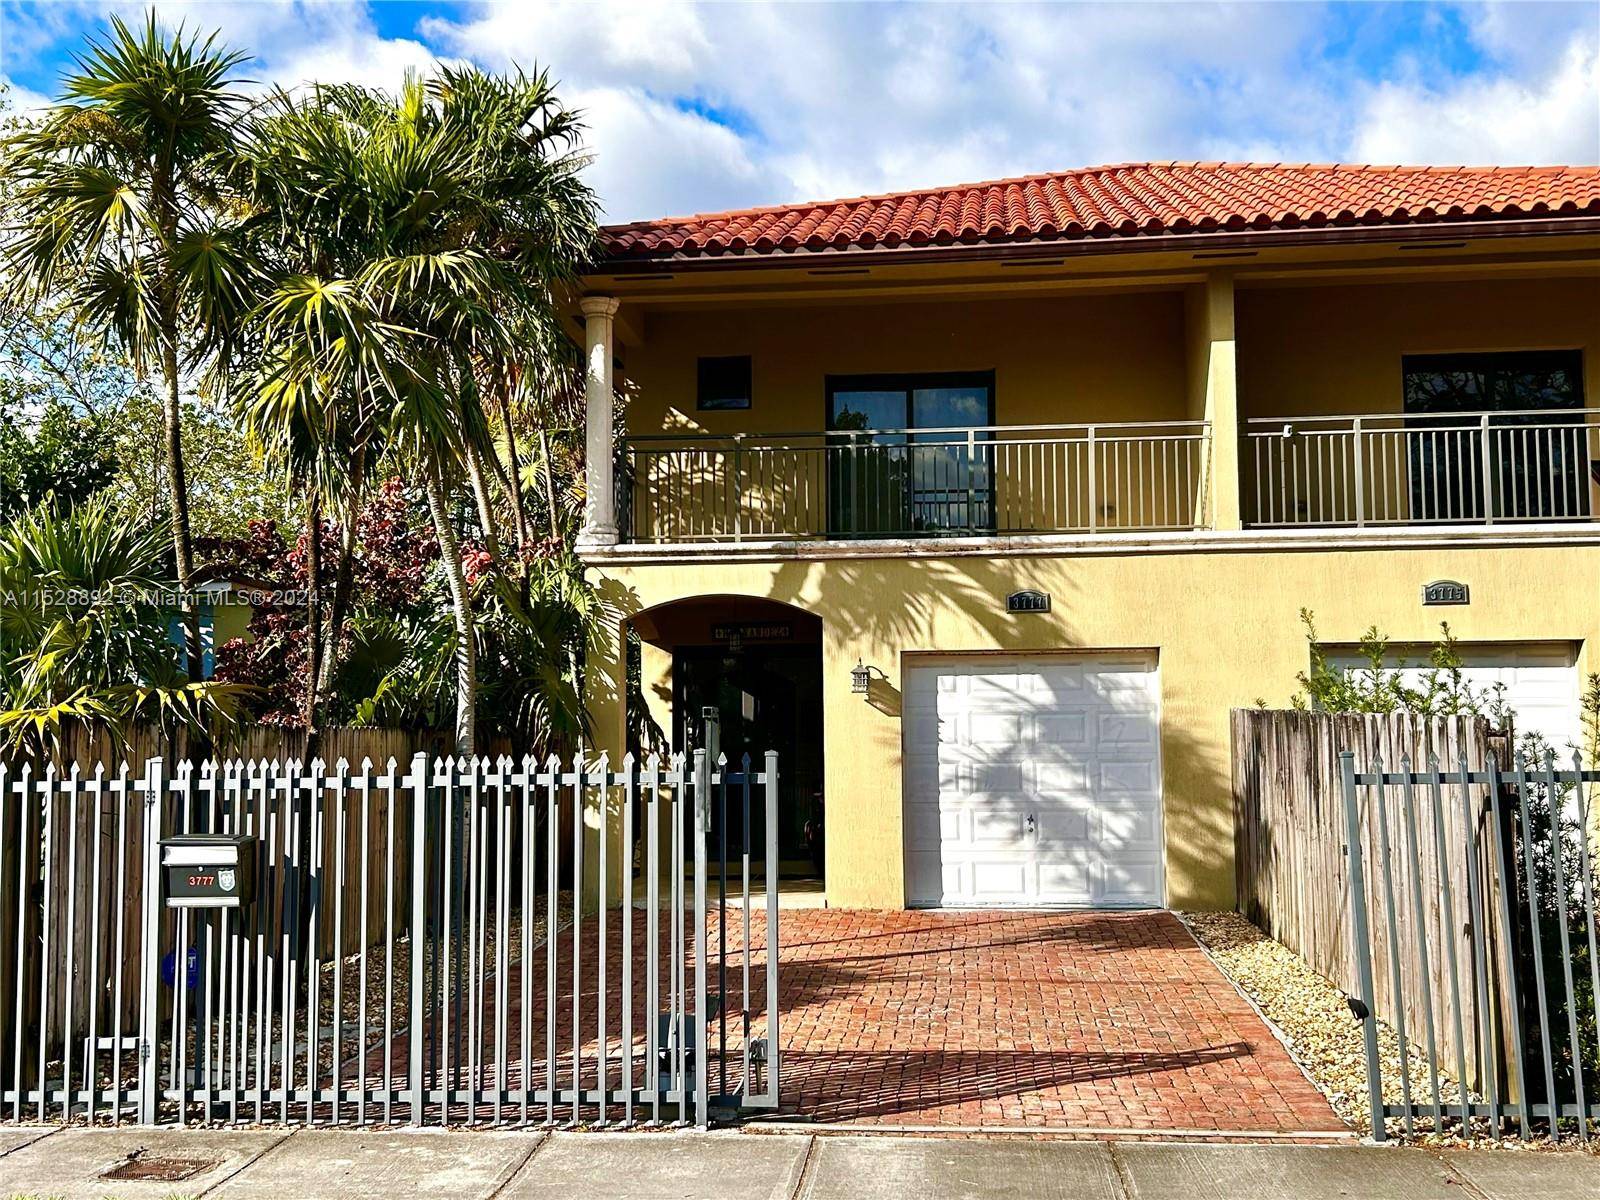 Spacious townhouse located steps away from Douglas Park and minutes to great restaurants shops in Coconut Grove and Coral Gables, the Plaza at Coral Gables, Merrick Park Shops and Coral ...